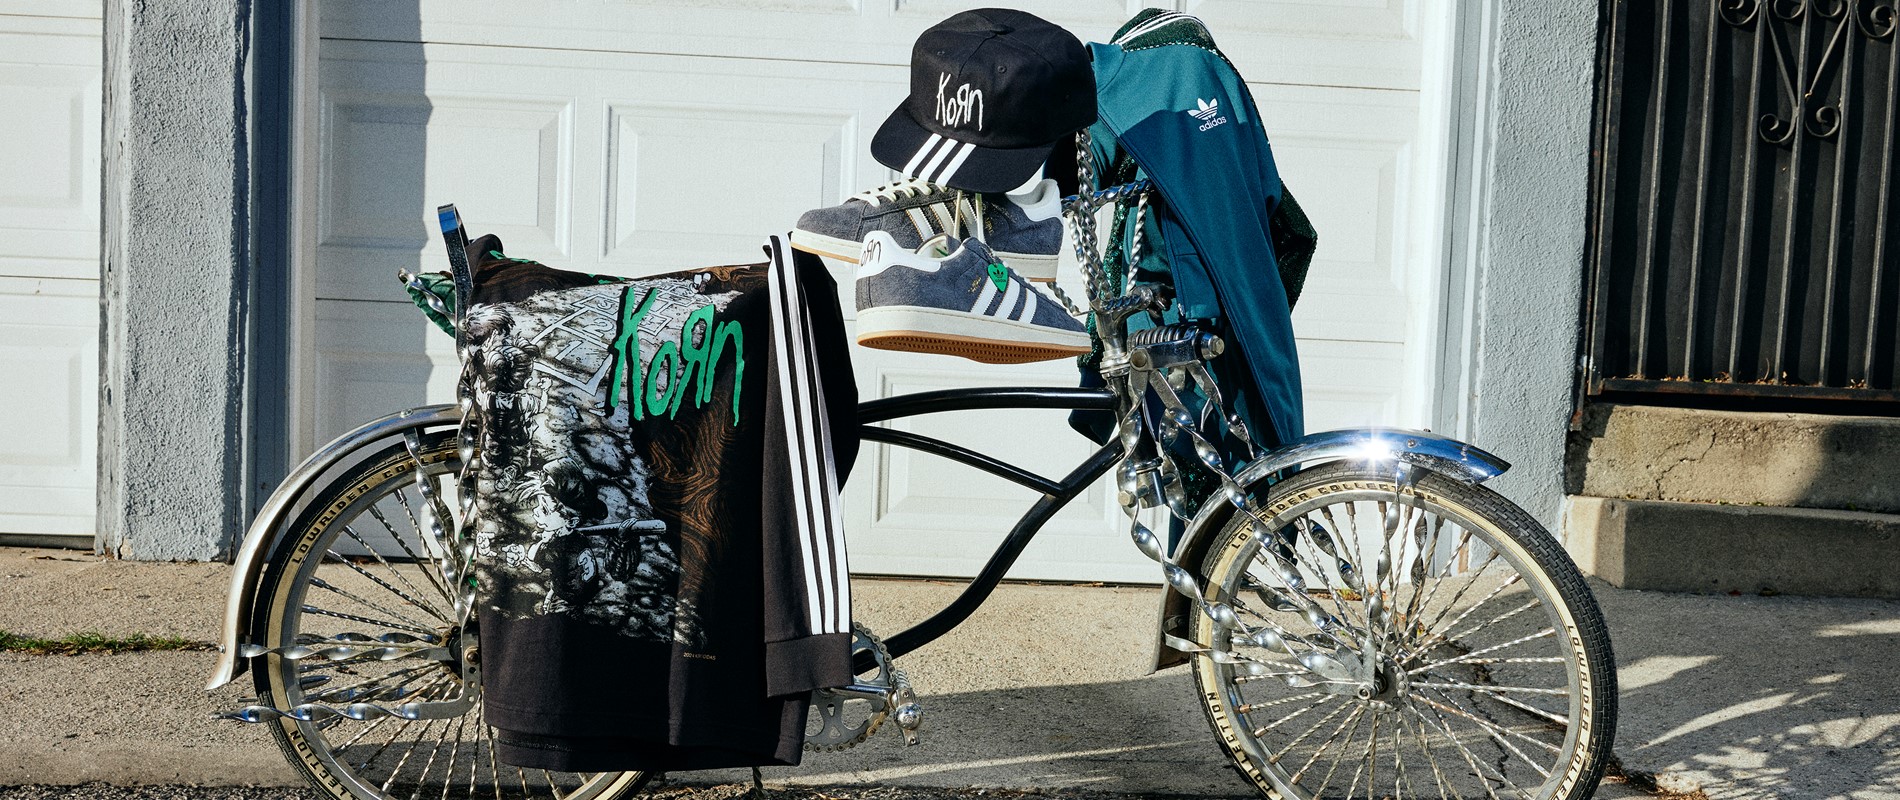 adidas Originals and KoRn Launch Second Collaborative Collection